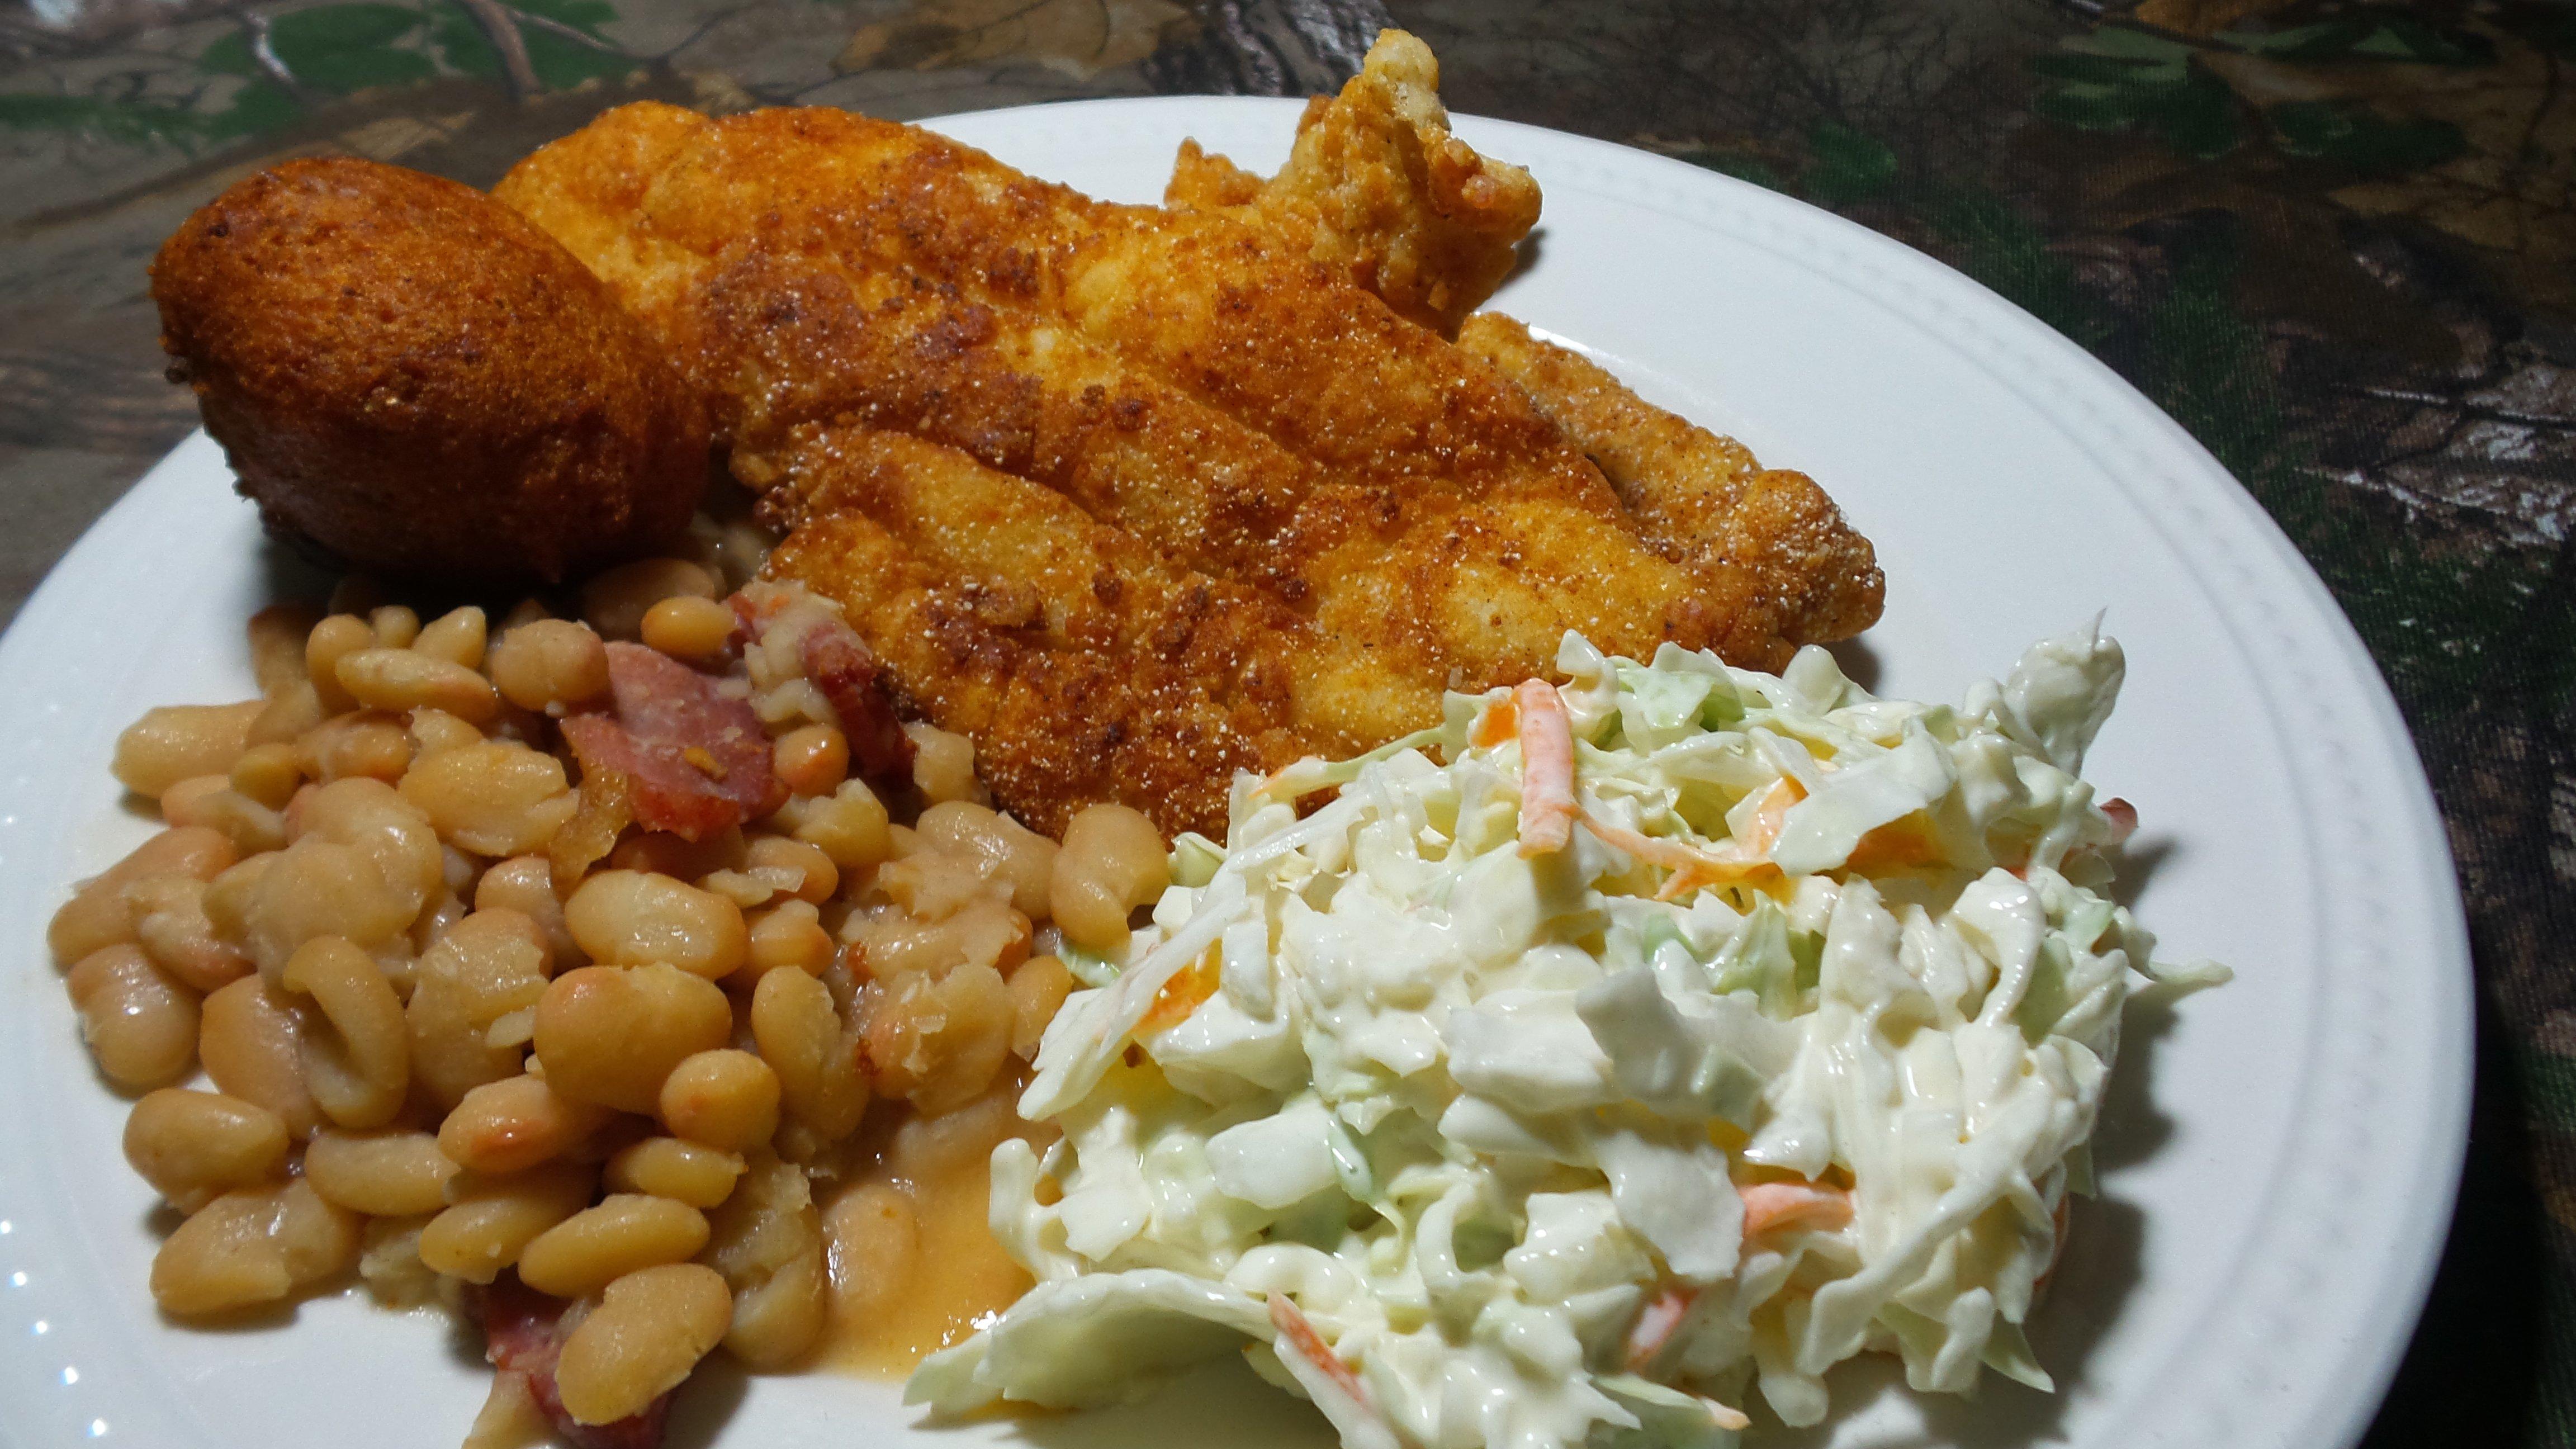 Nothing says spring like the first mess of fried fish served with coleslaw, white beans and hushpuppies.